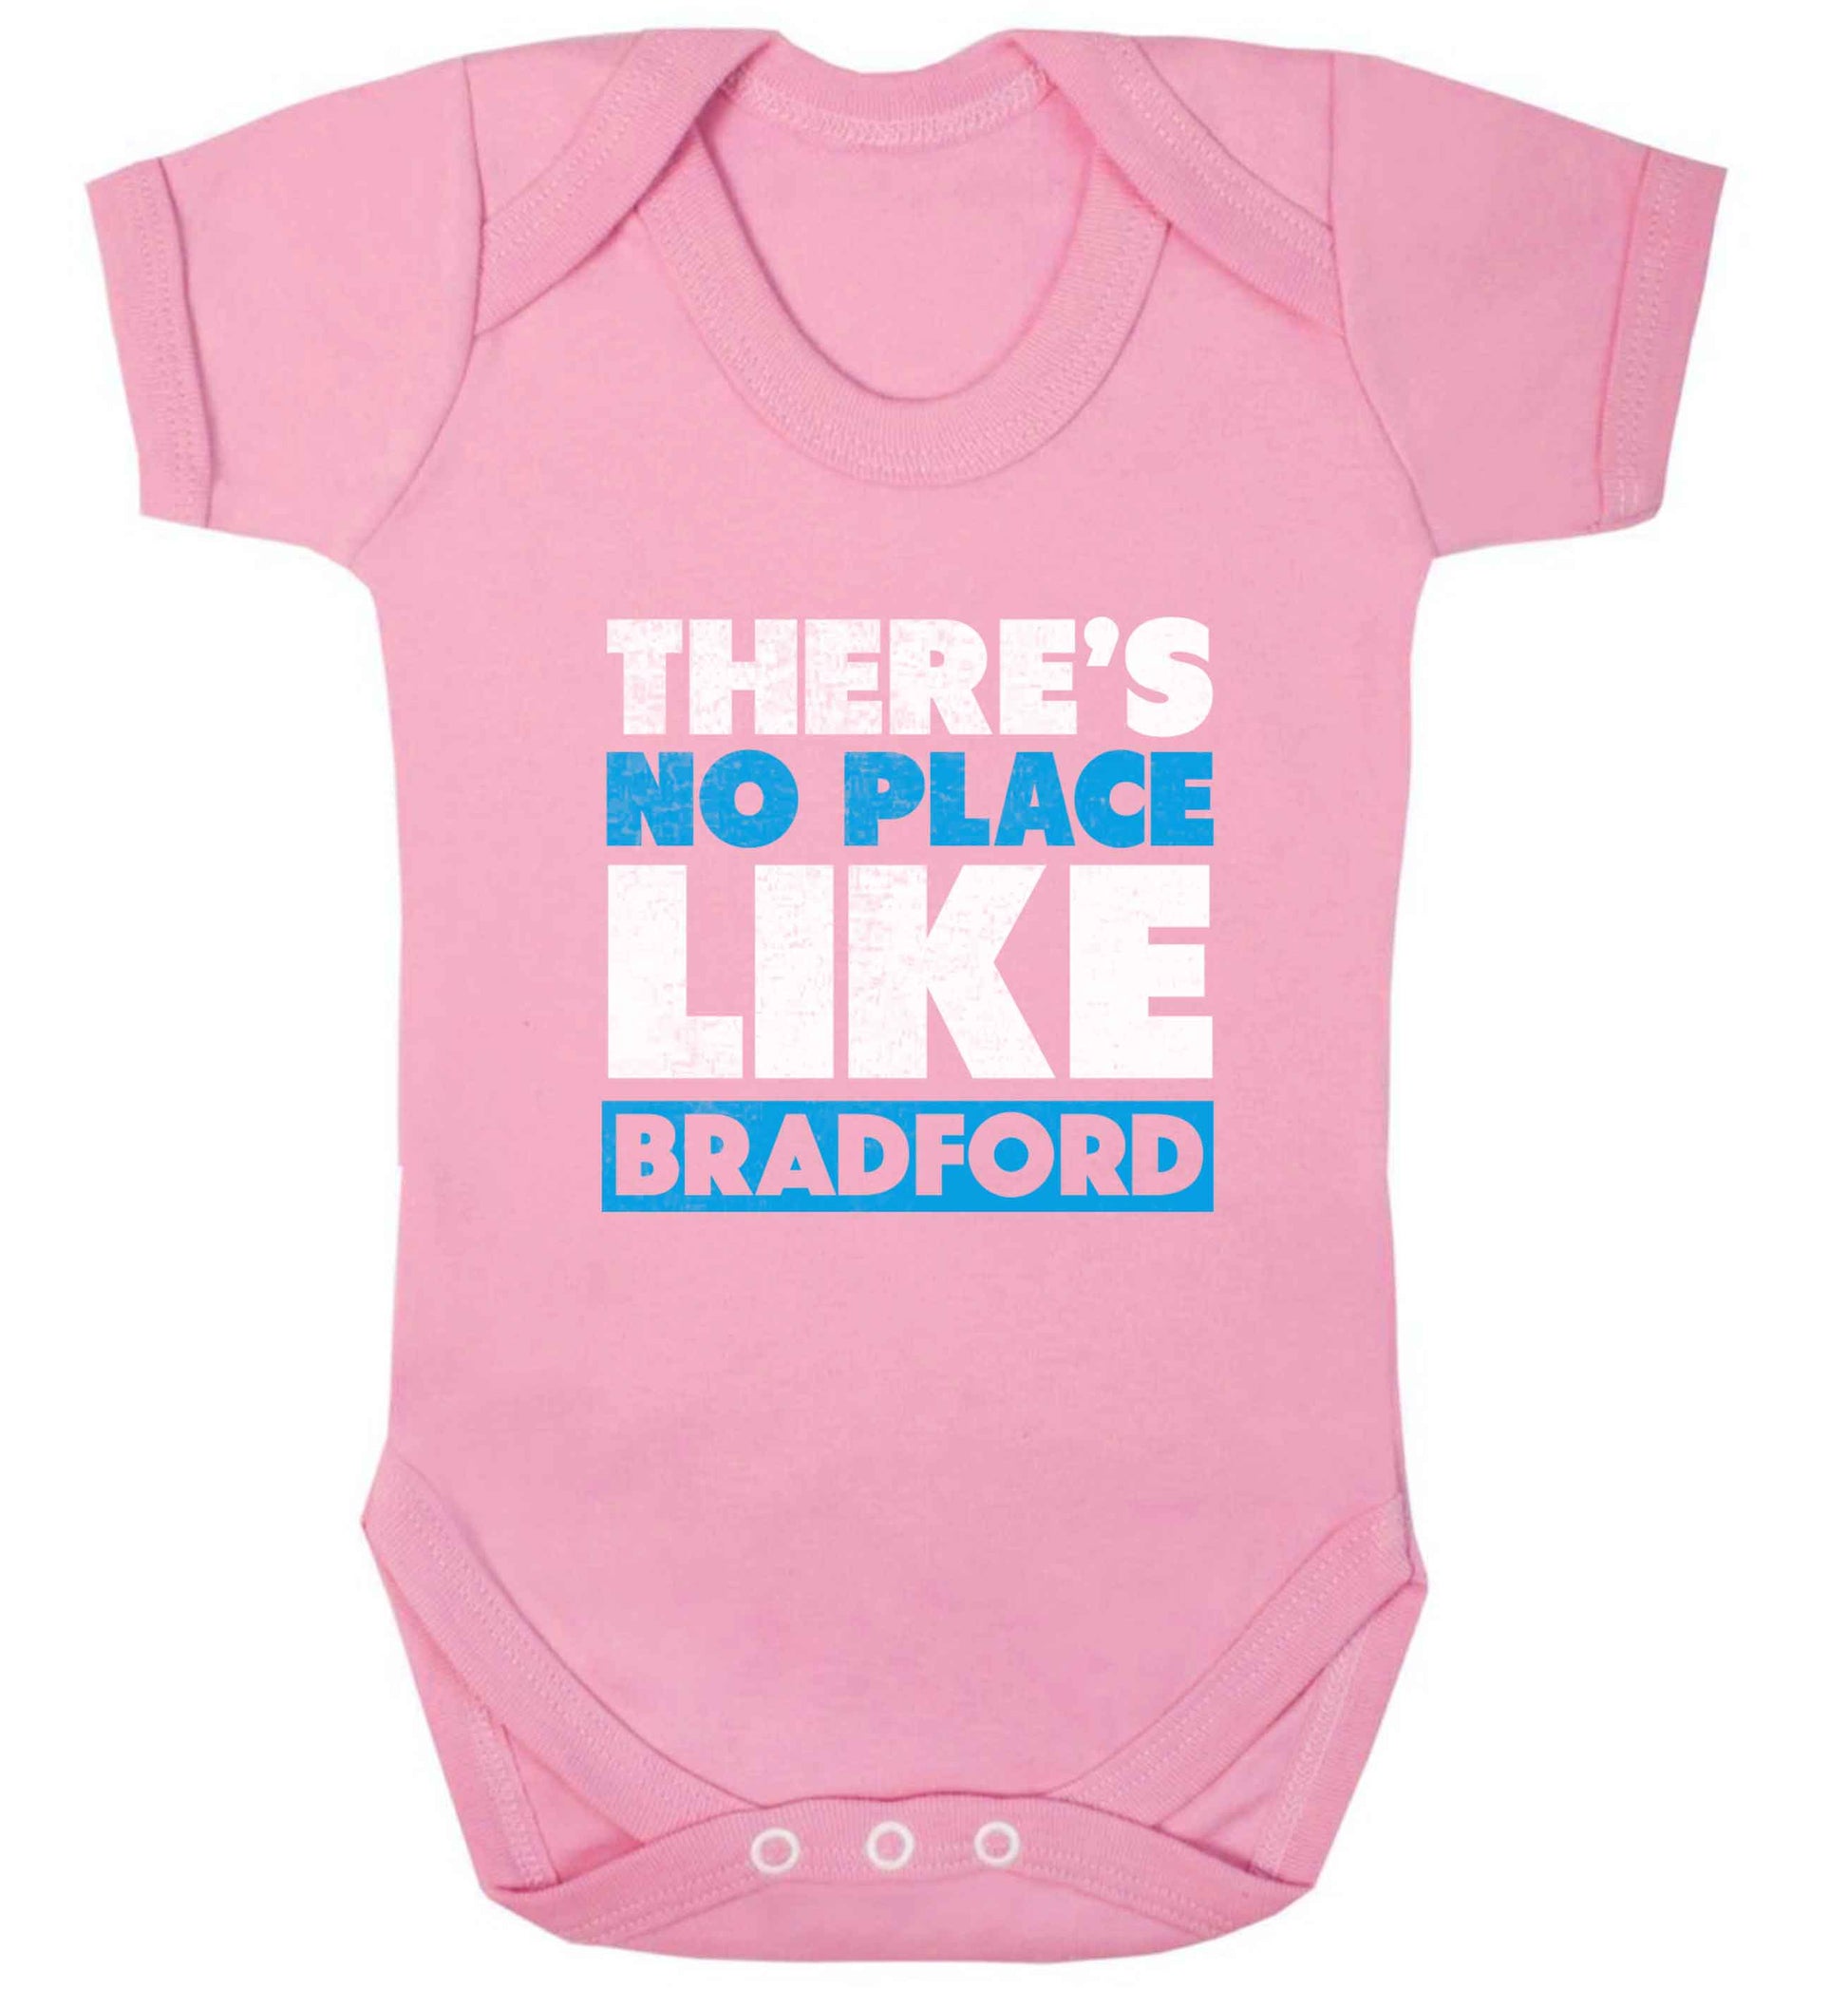 There's no place like Bradford baby vest pale pink 18-24 months